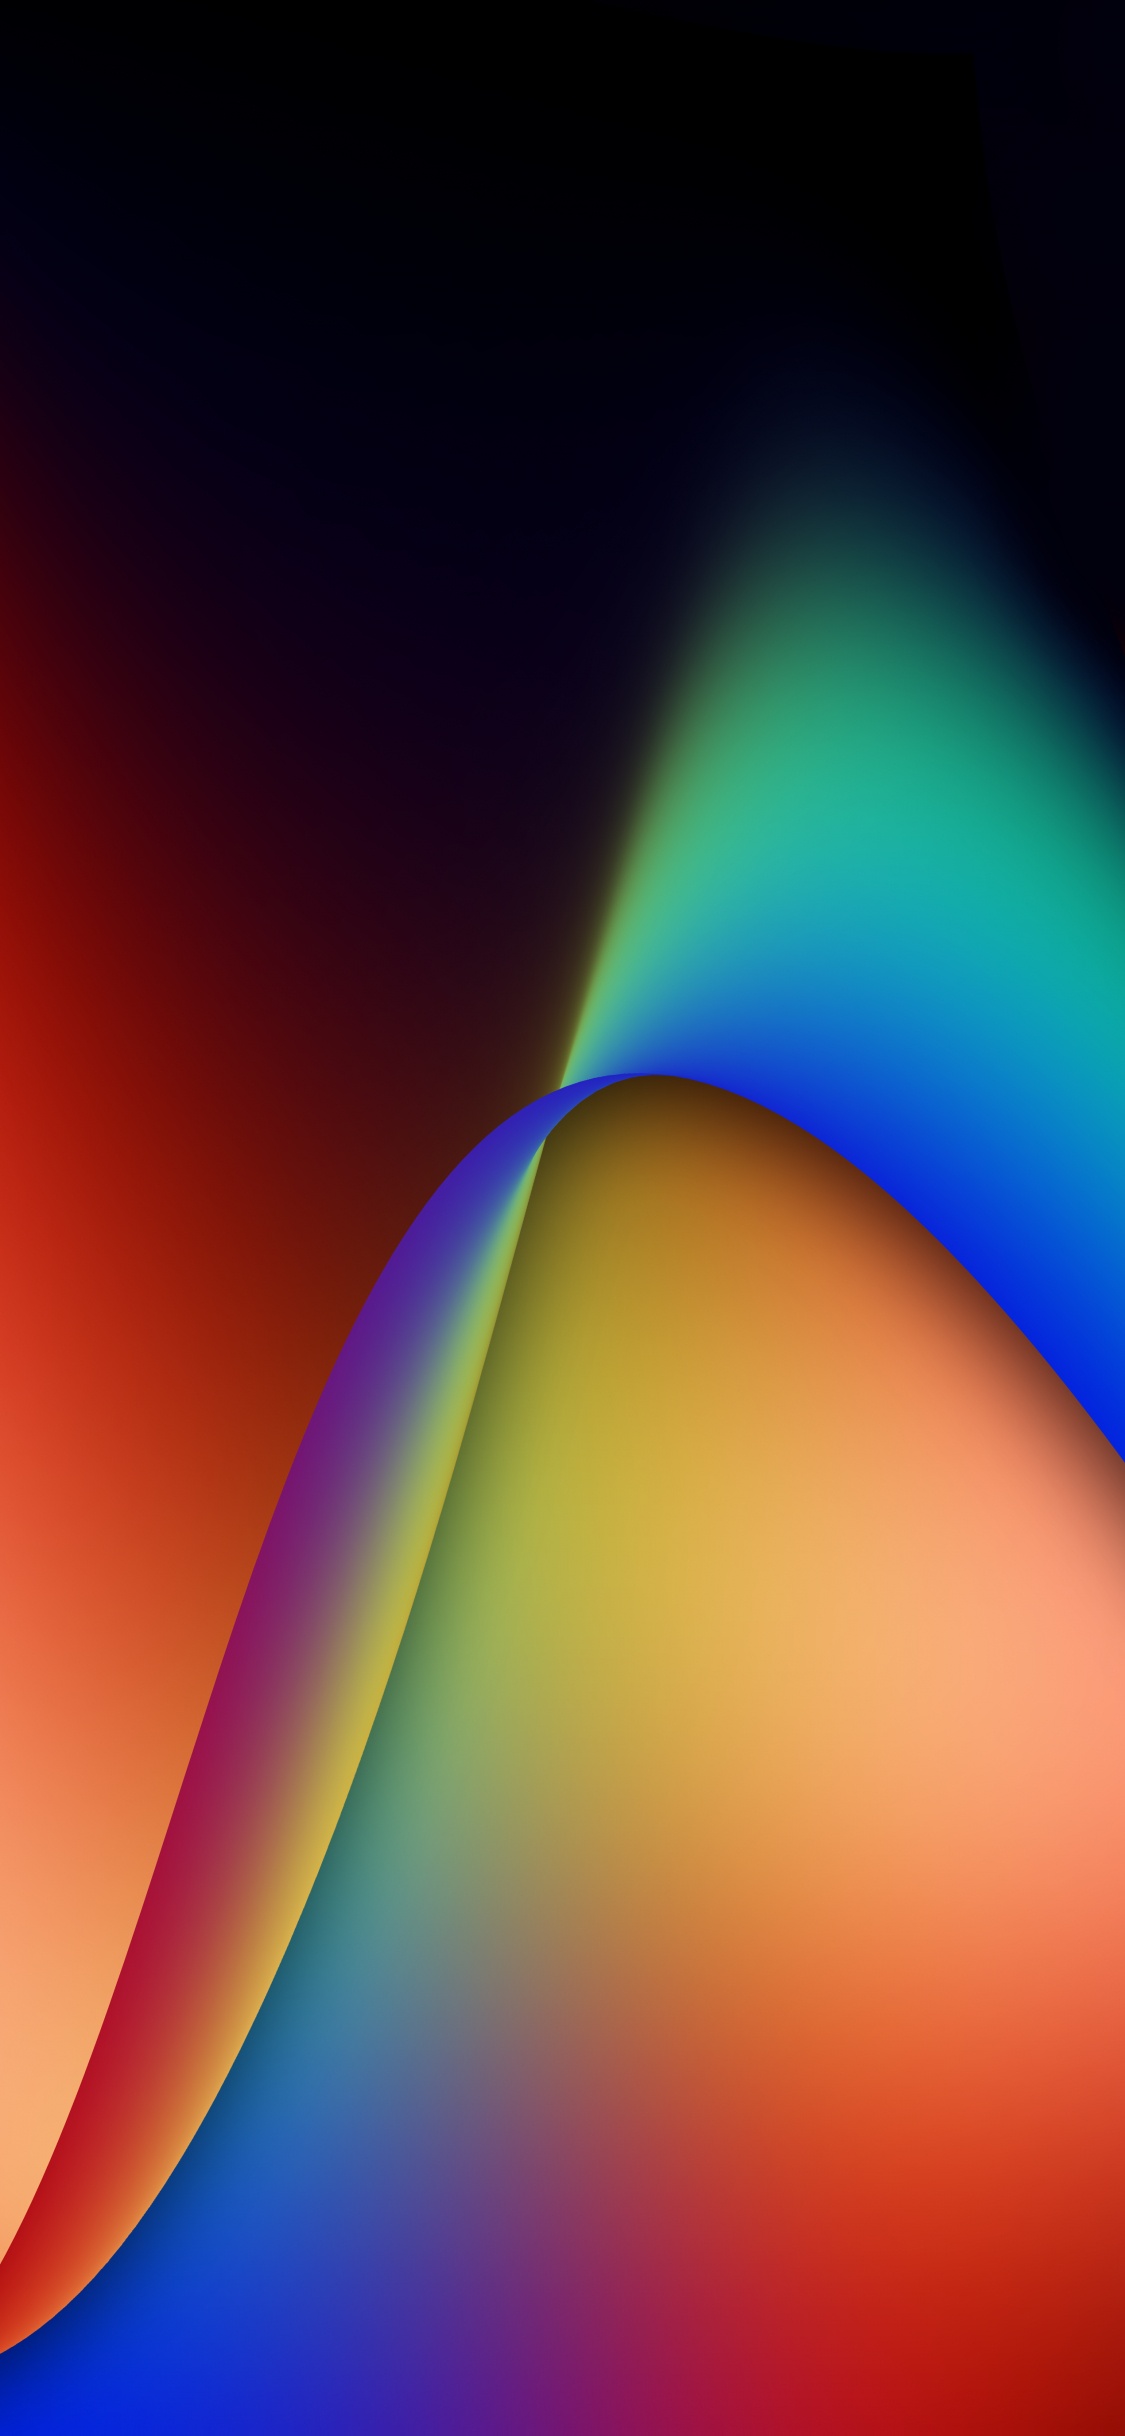 Light, Science, Physics, Colorfulness, Electric Blue. Wallpaper in 1125x2436 Resolution